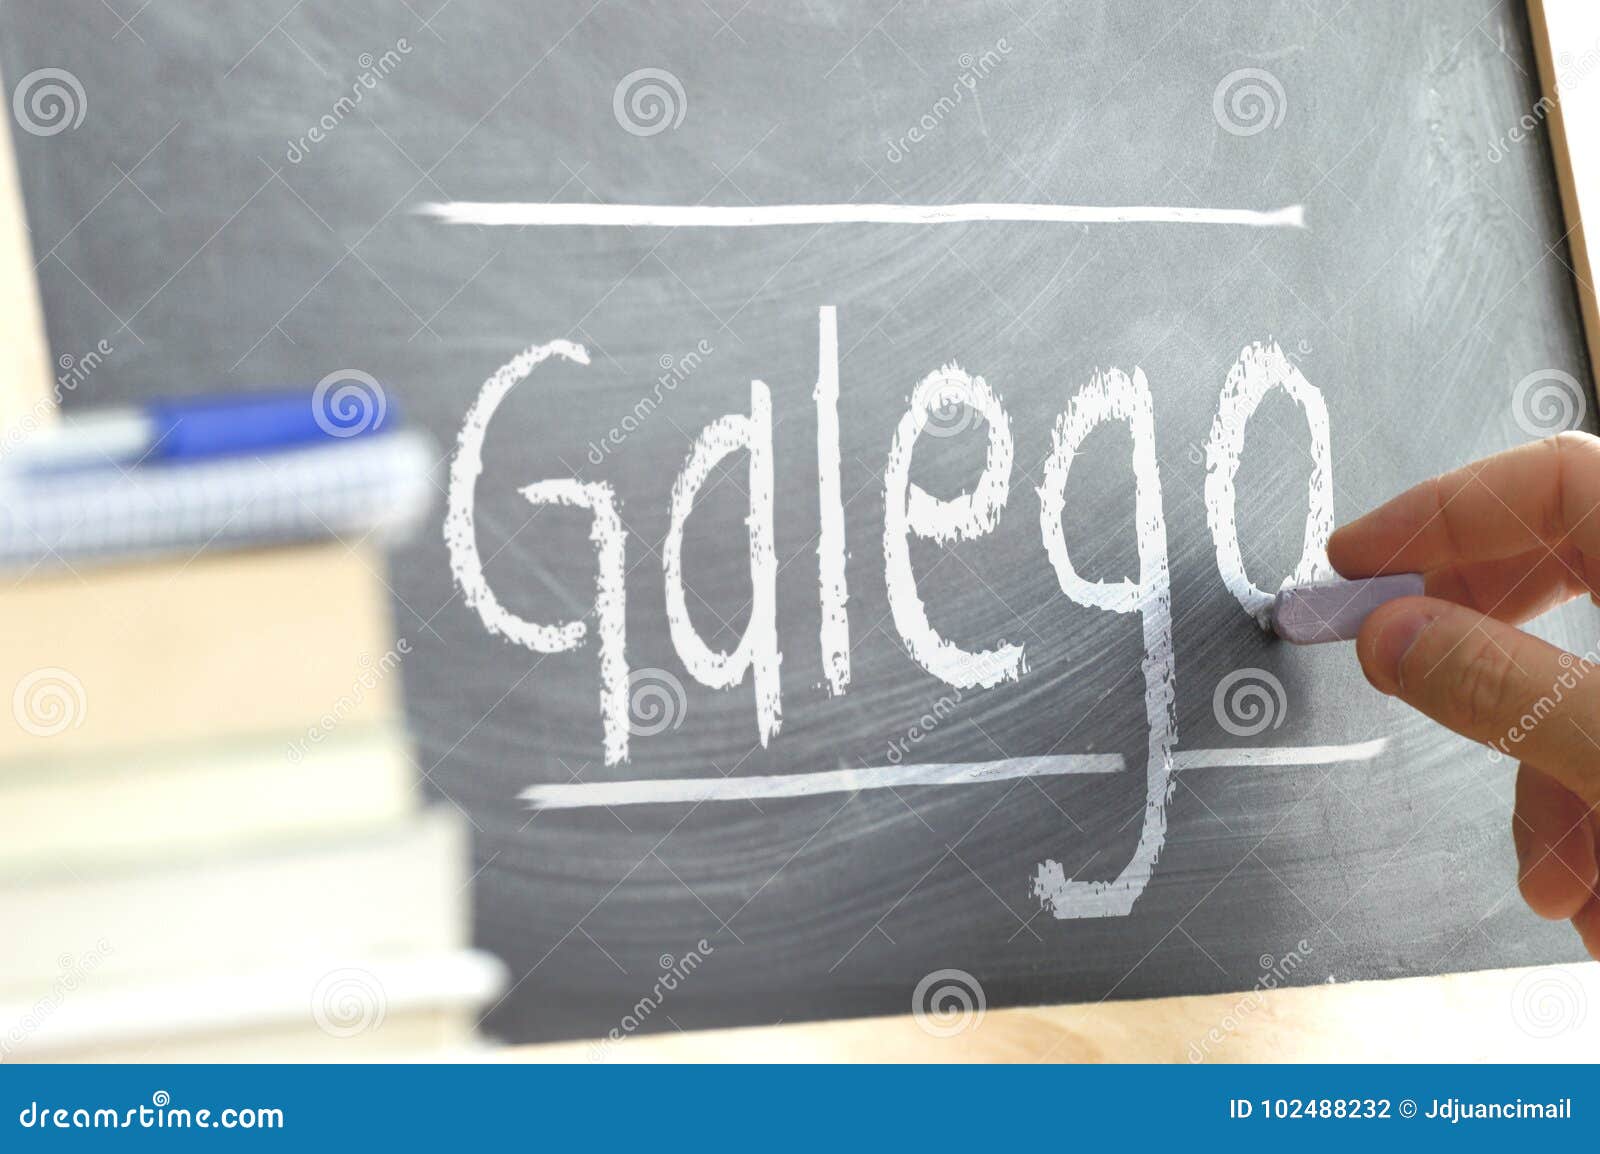 hand writing on a blackboard in a language class with the word galician wrote on.